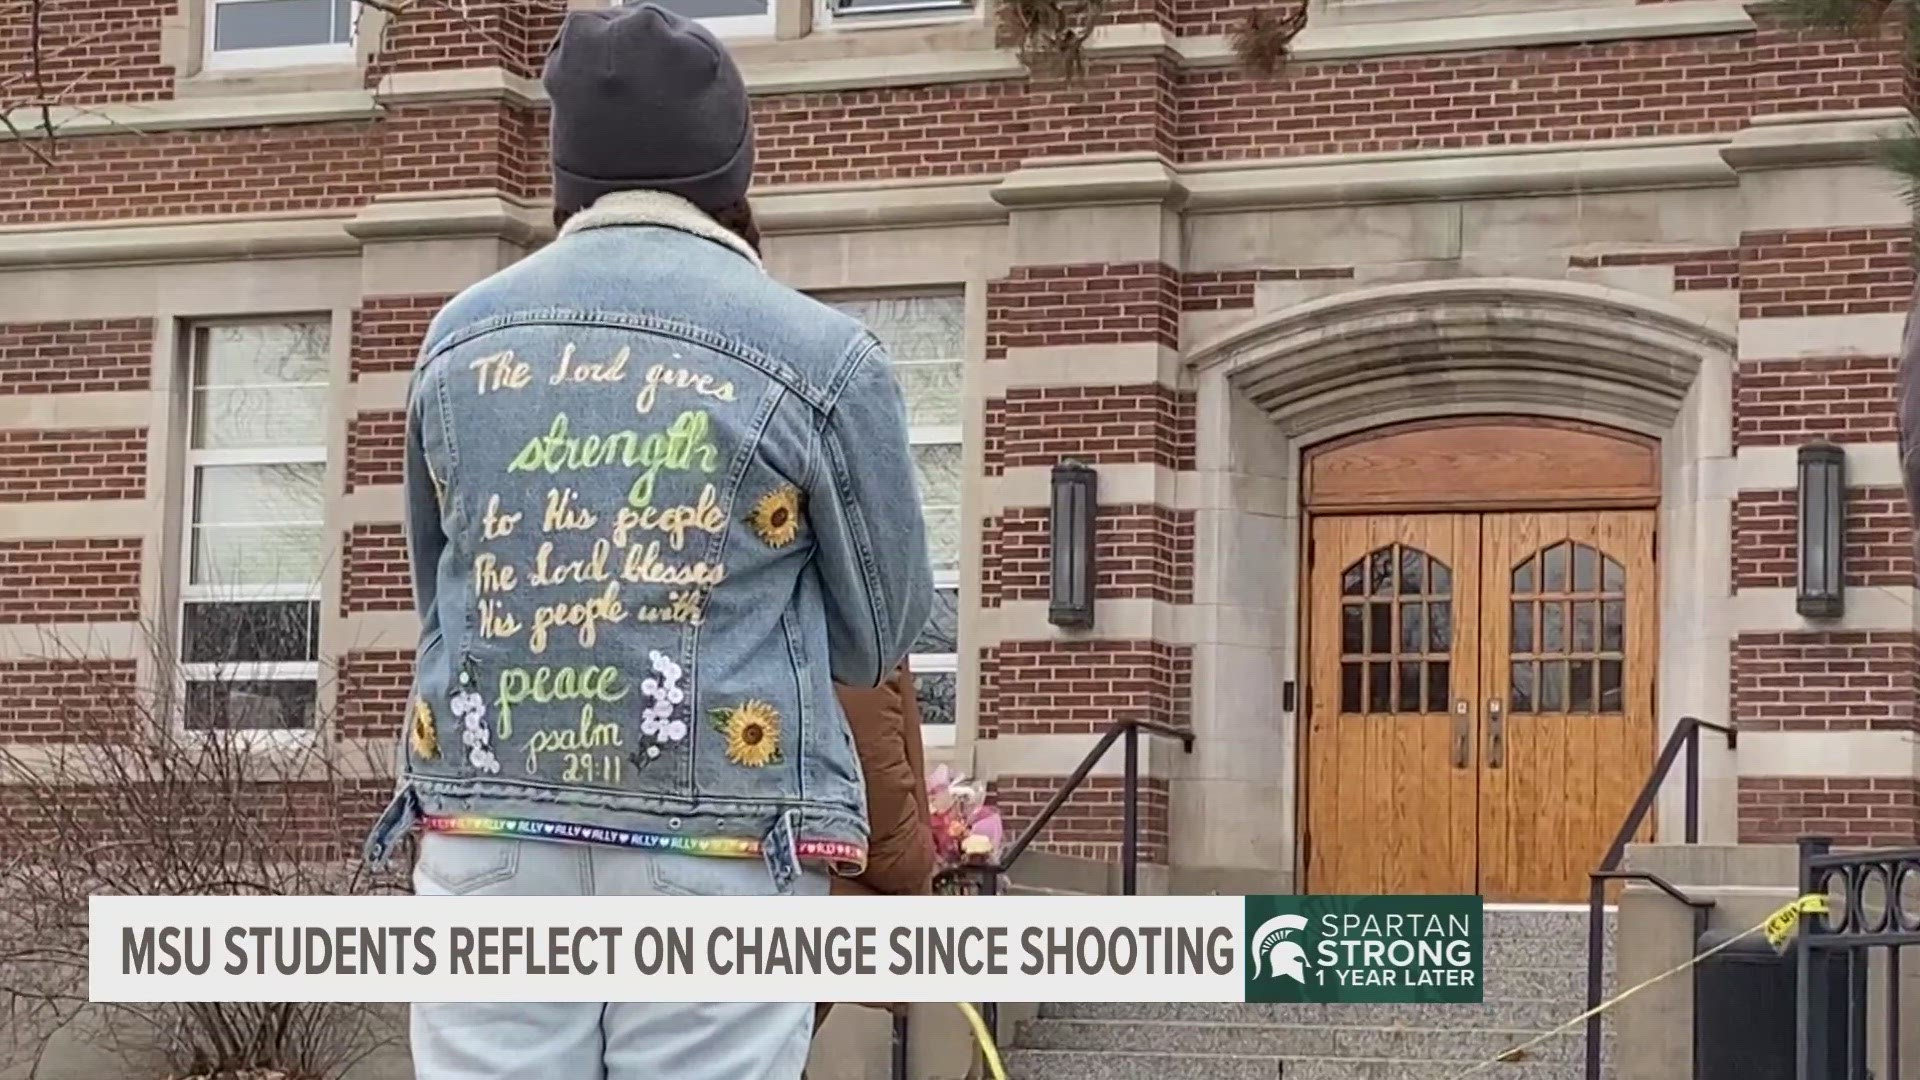 As a number of gun reform laws took effect on Tuesday, one year since the shooting, students who led in calling for change are reflecting on what they've seen since.